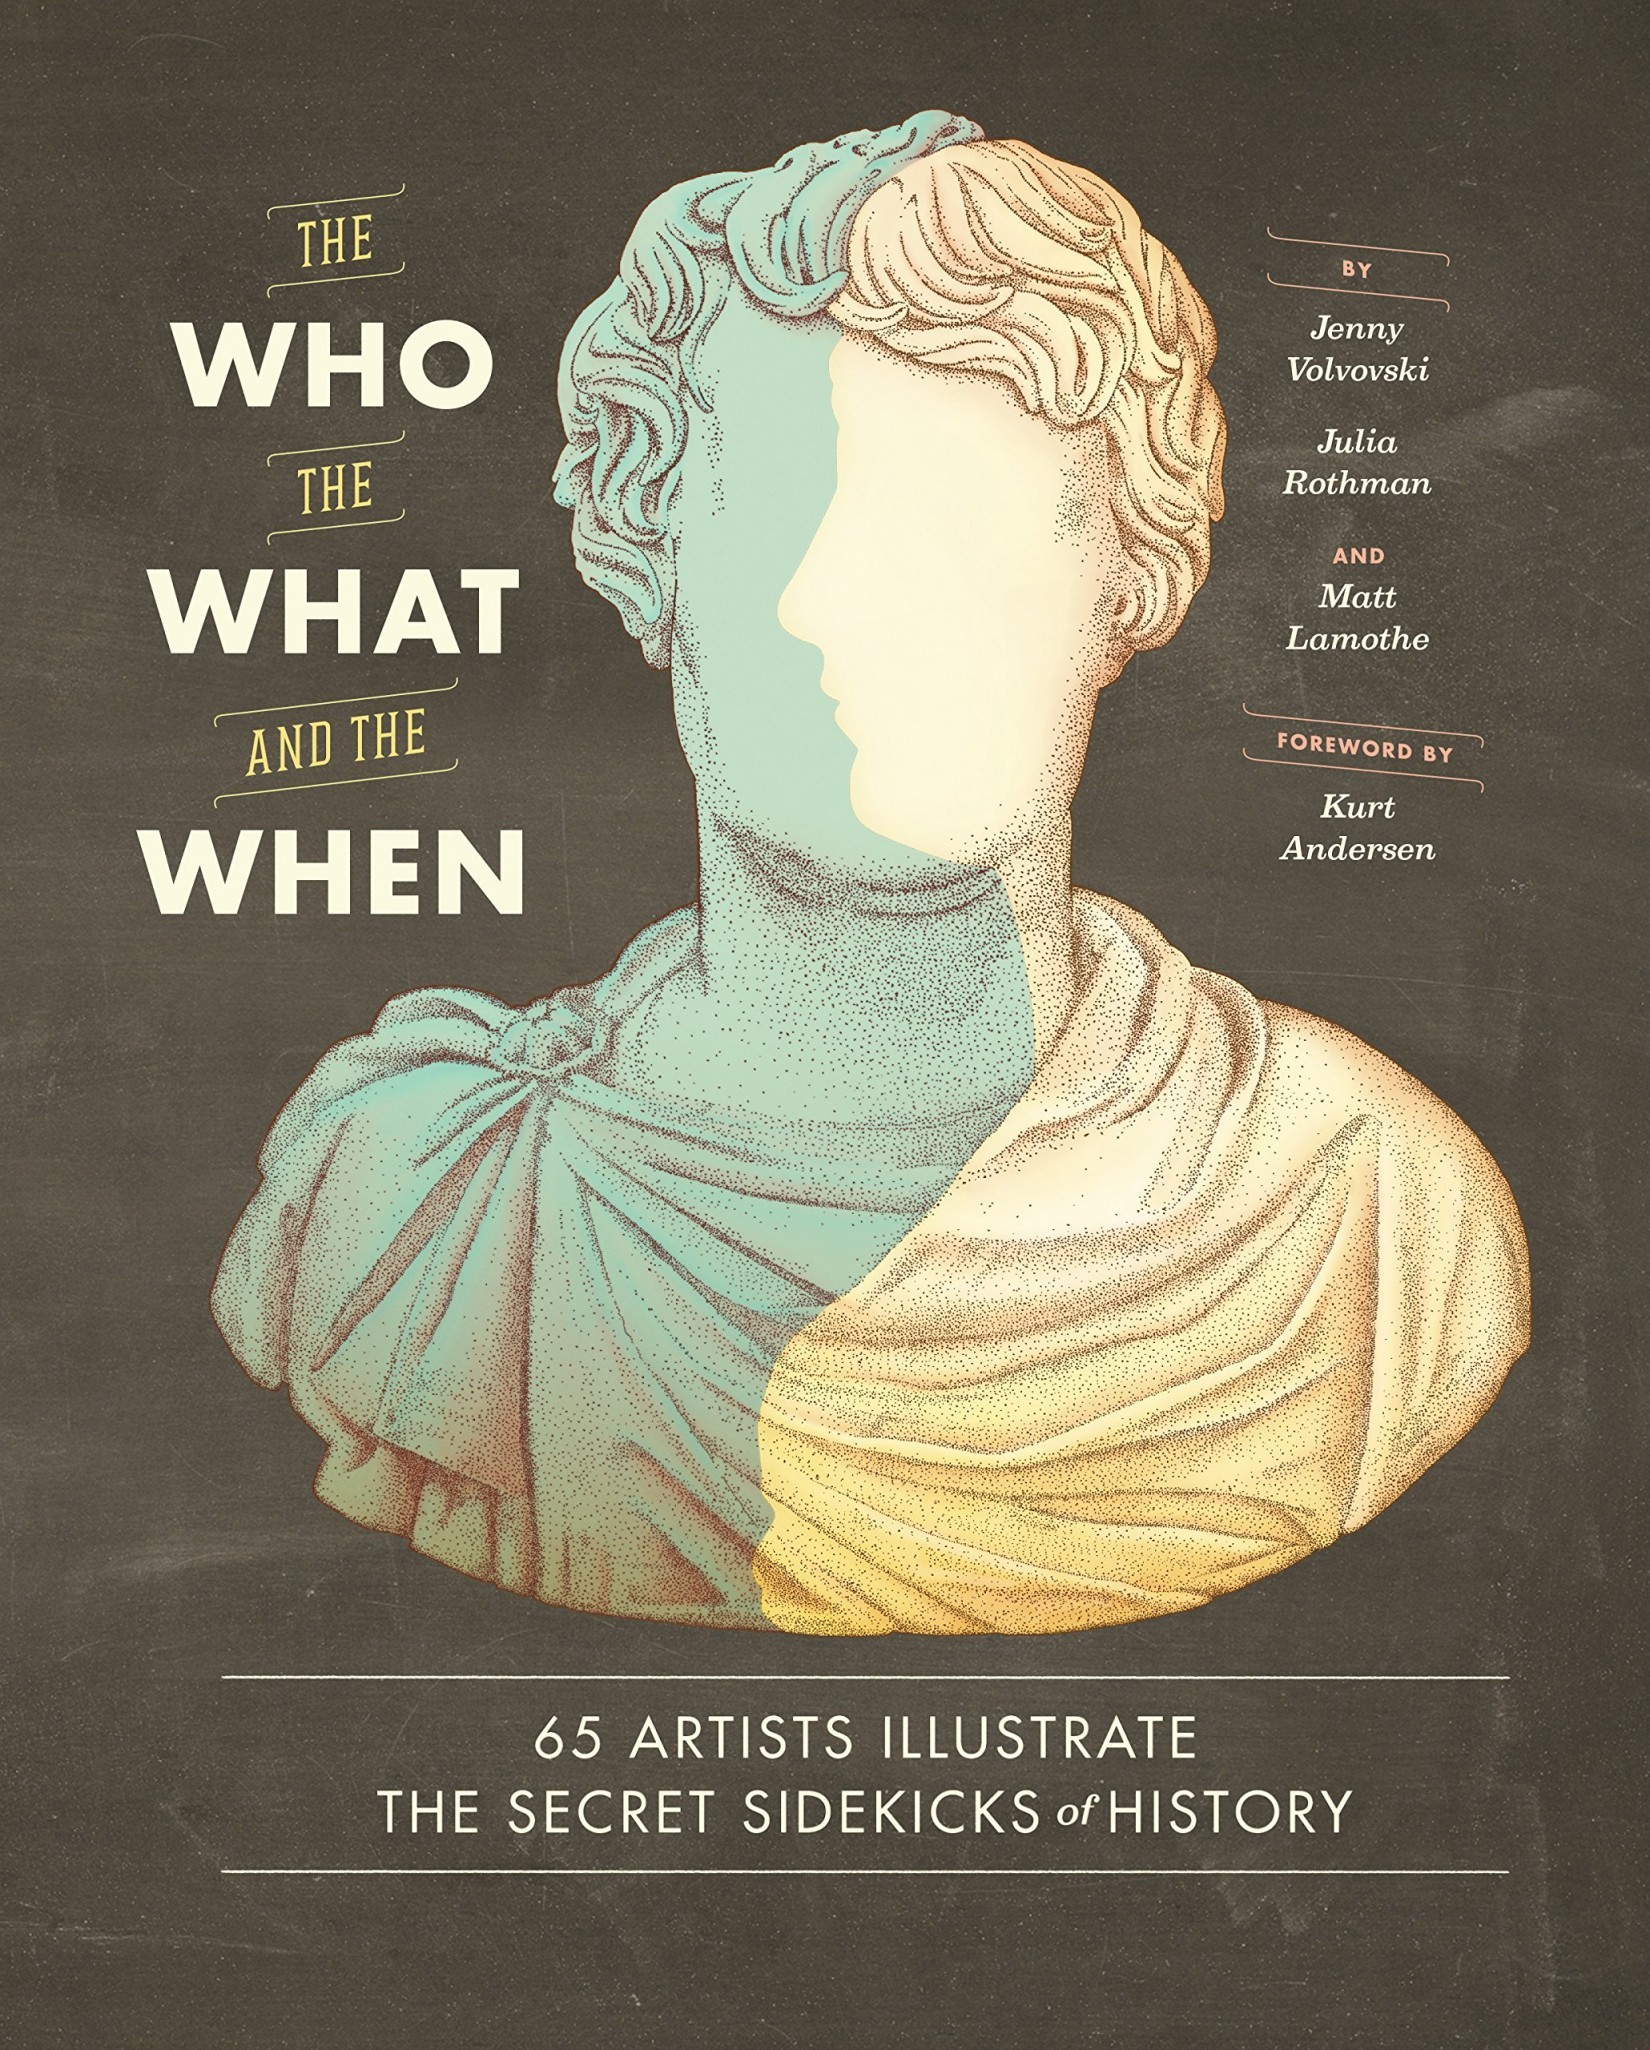 The Who, the What, and the When: 65 Artists Illustrate the Secret Sidekicks of History